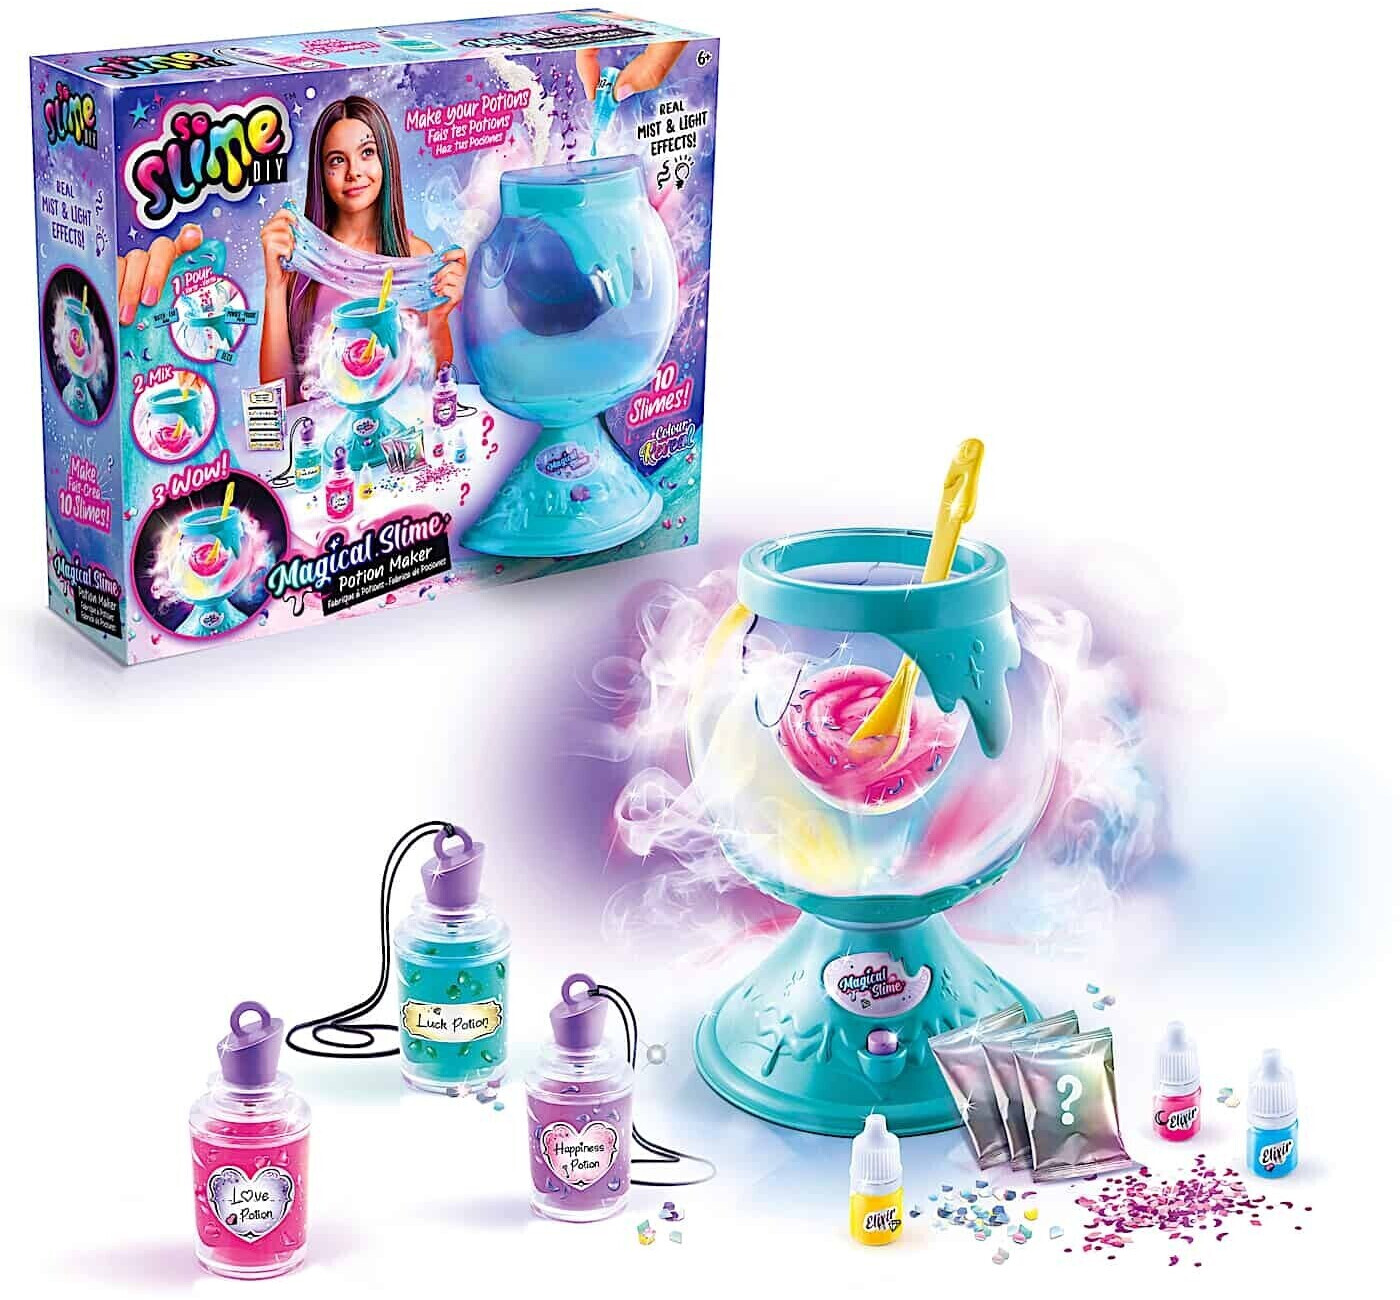 CANAL TOYS Slime Factory DIY pas cher 